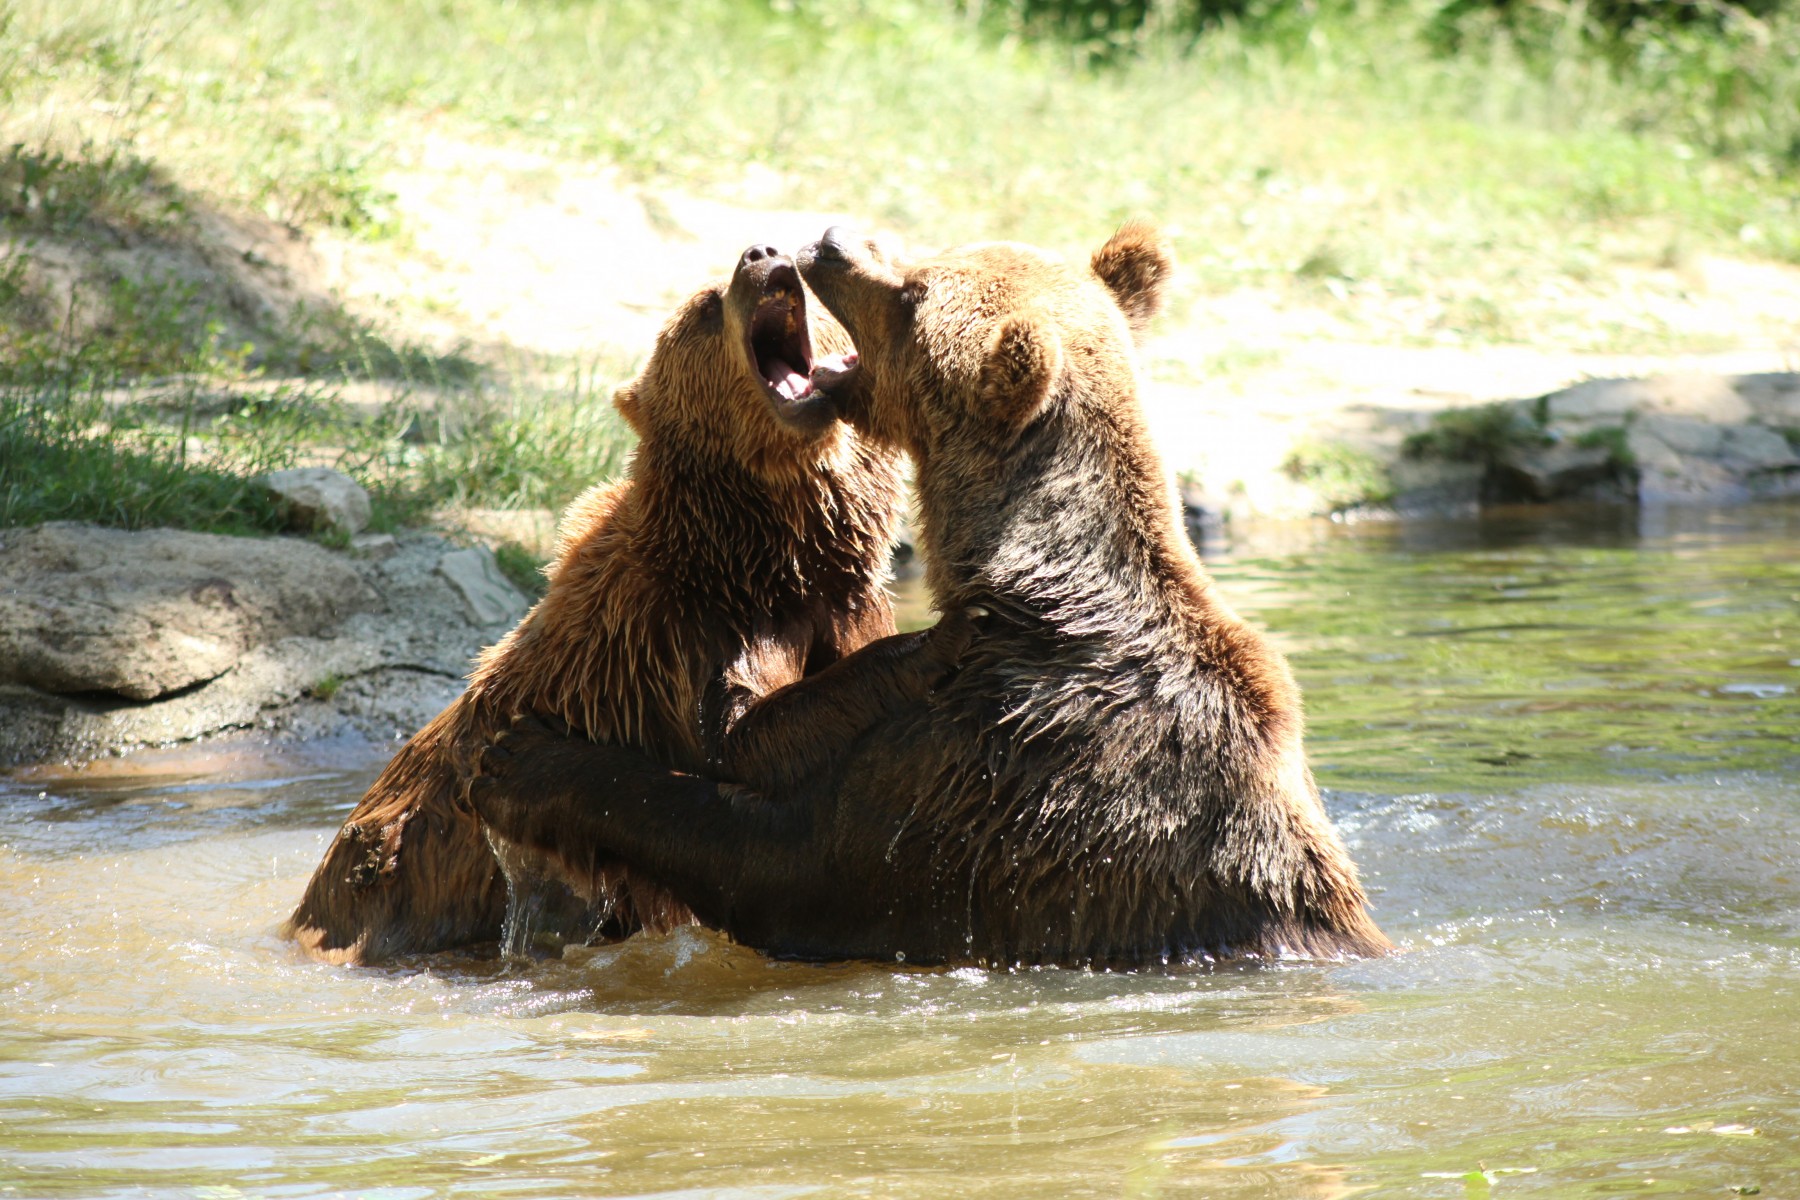 Two bears play fighting in the pond in their enclosure at the Romanian Bear Sanctuary.